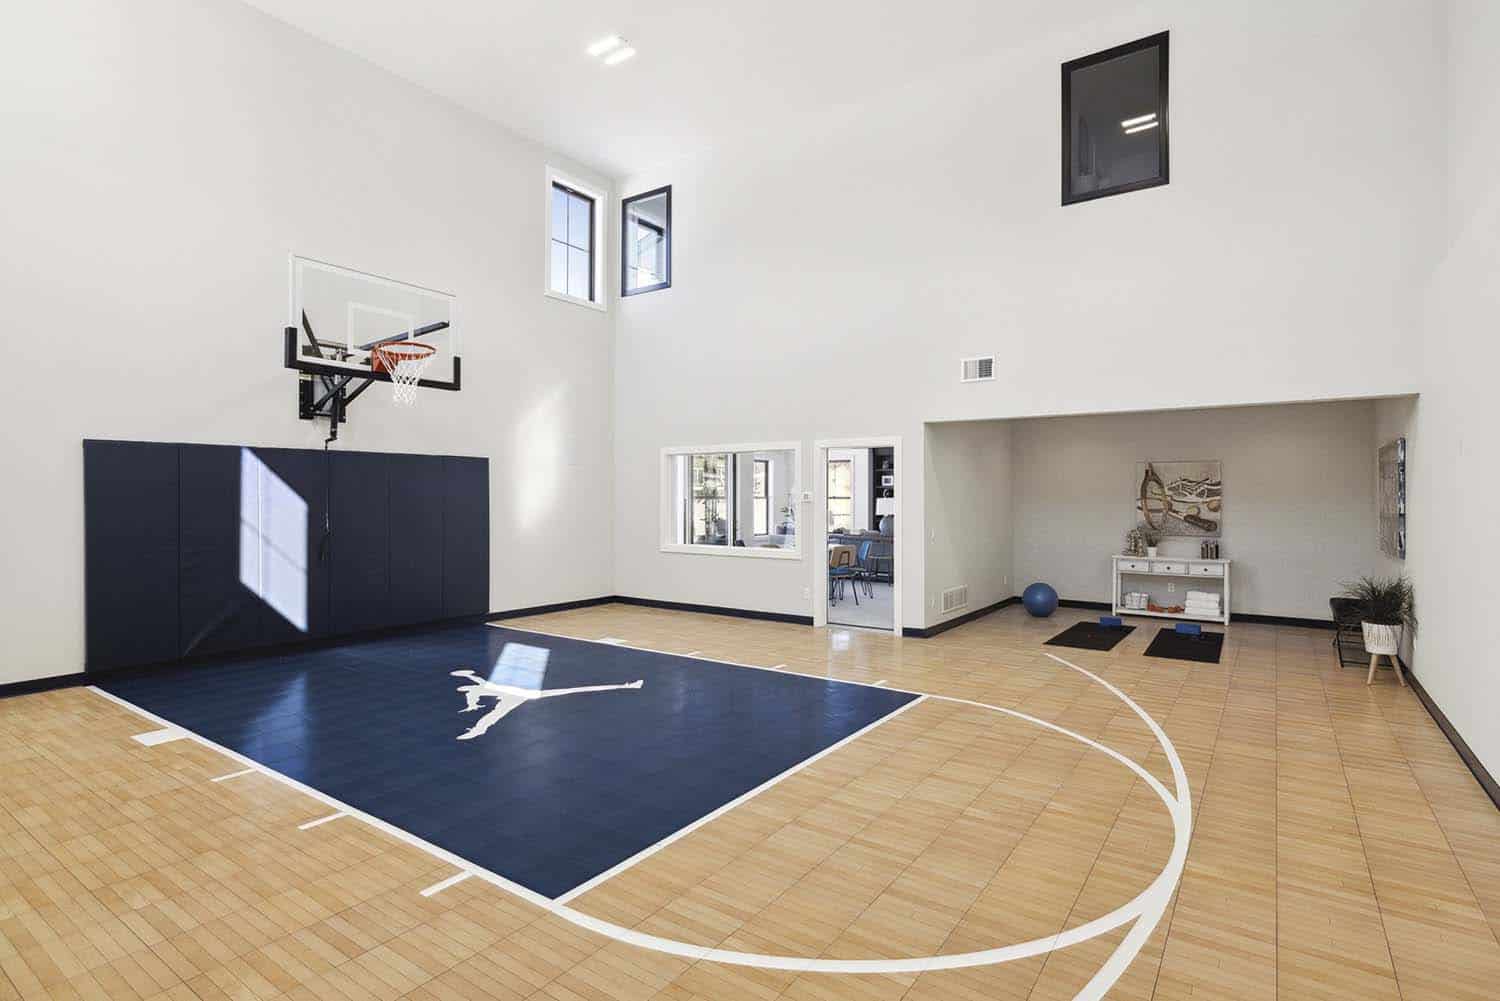 contemporary sport court and exercise room